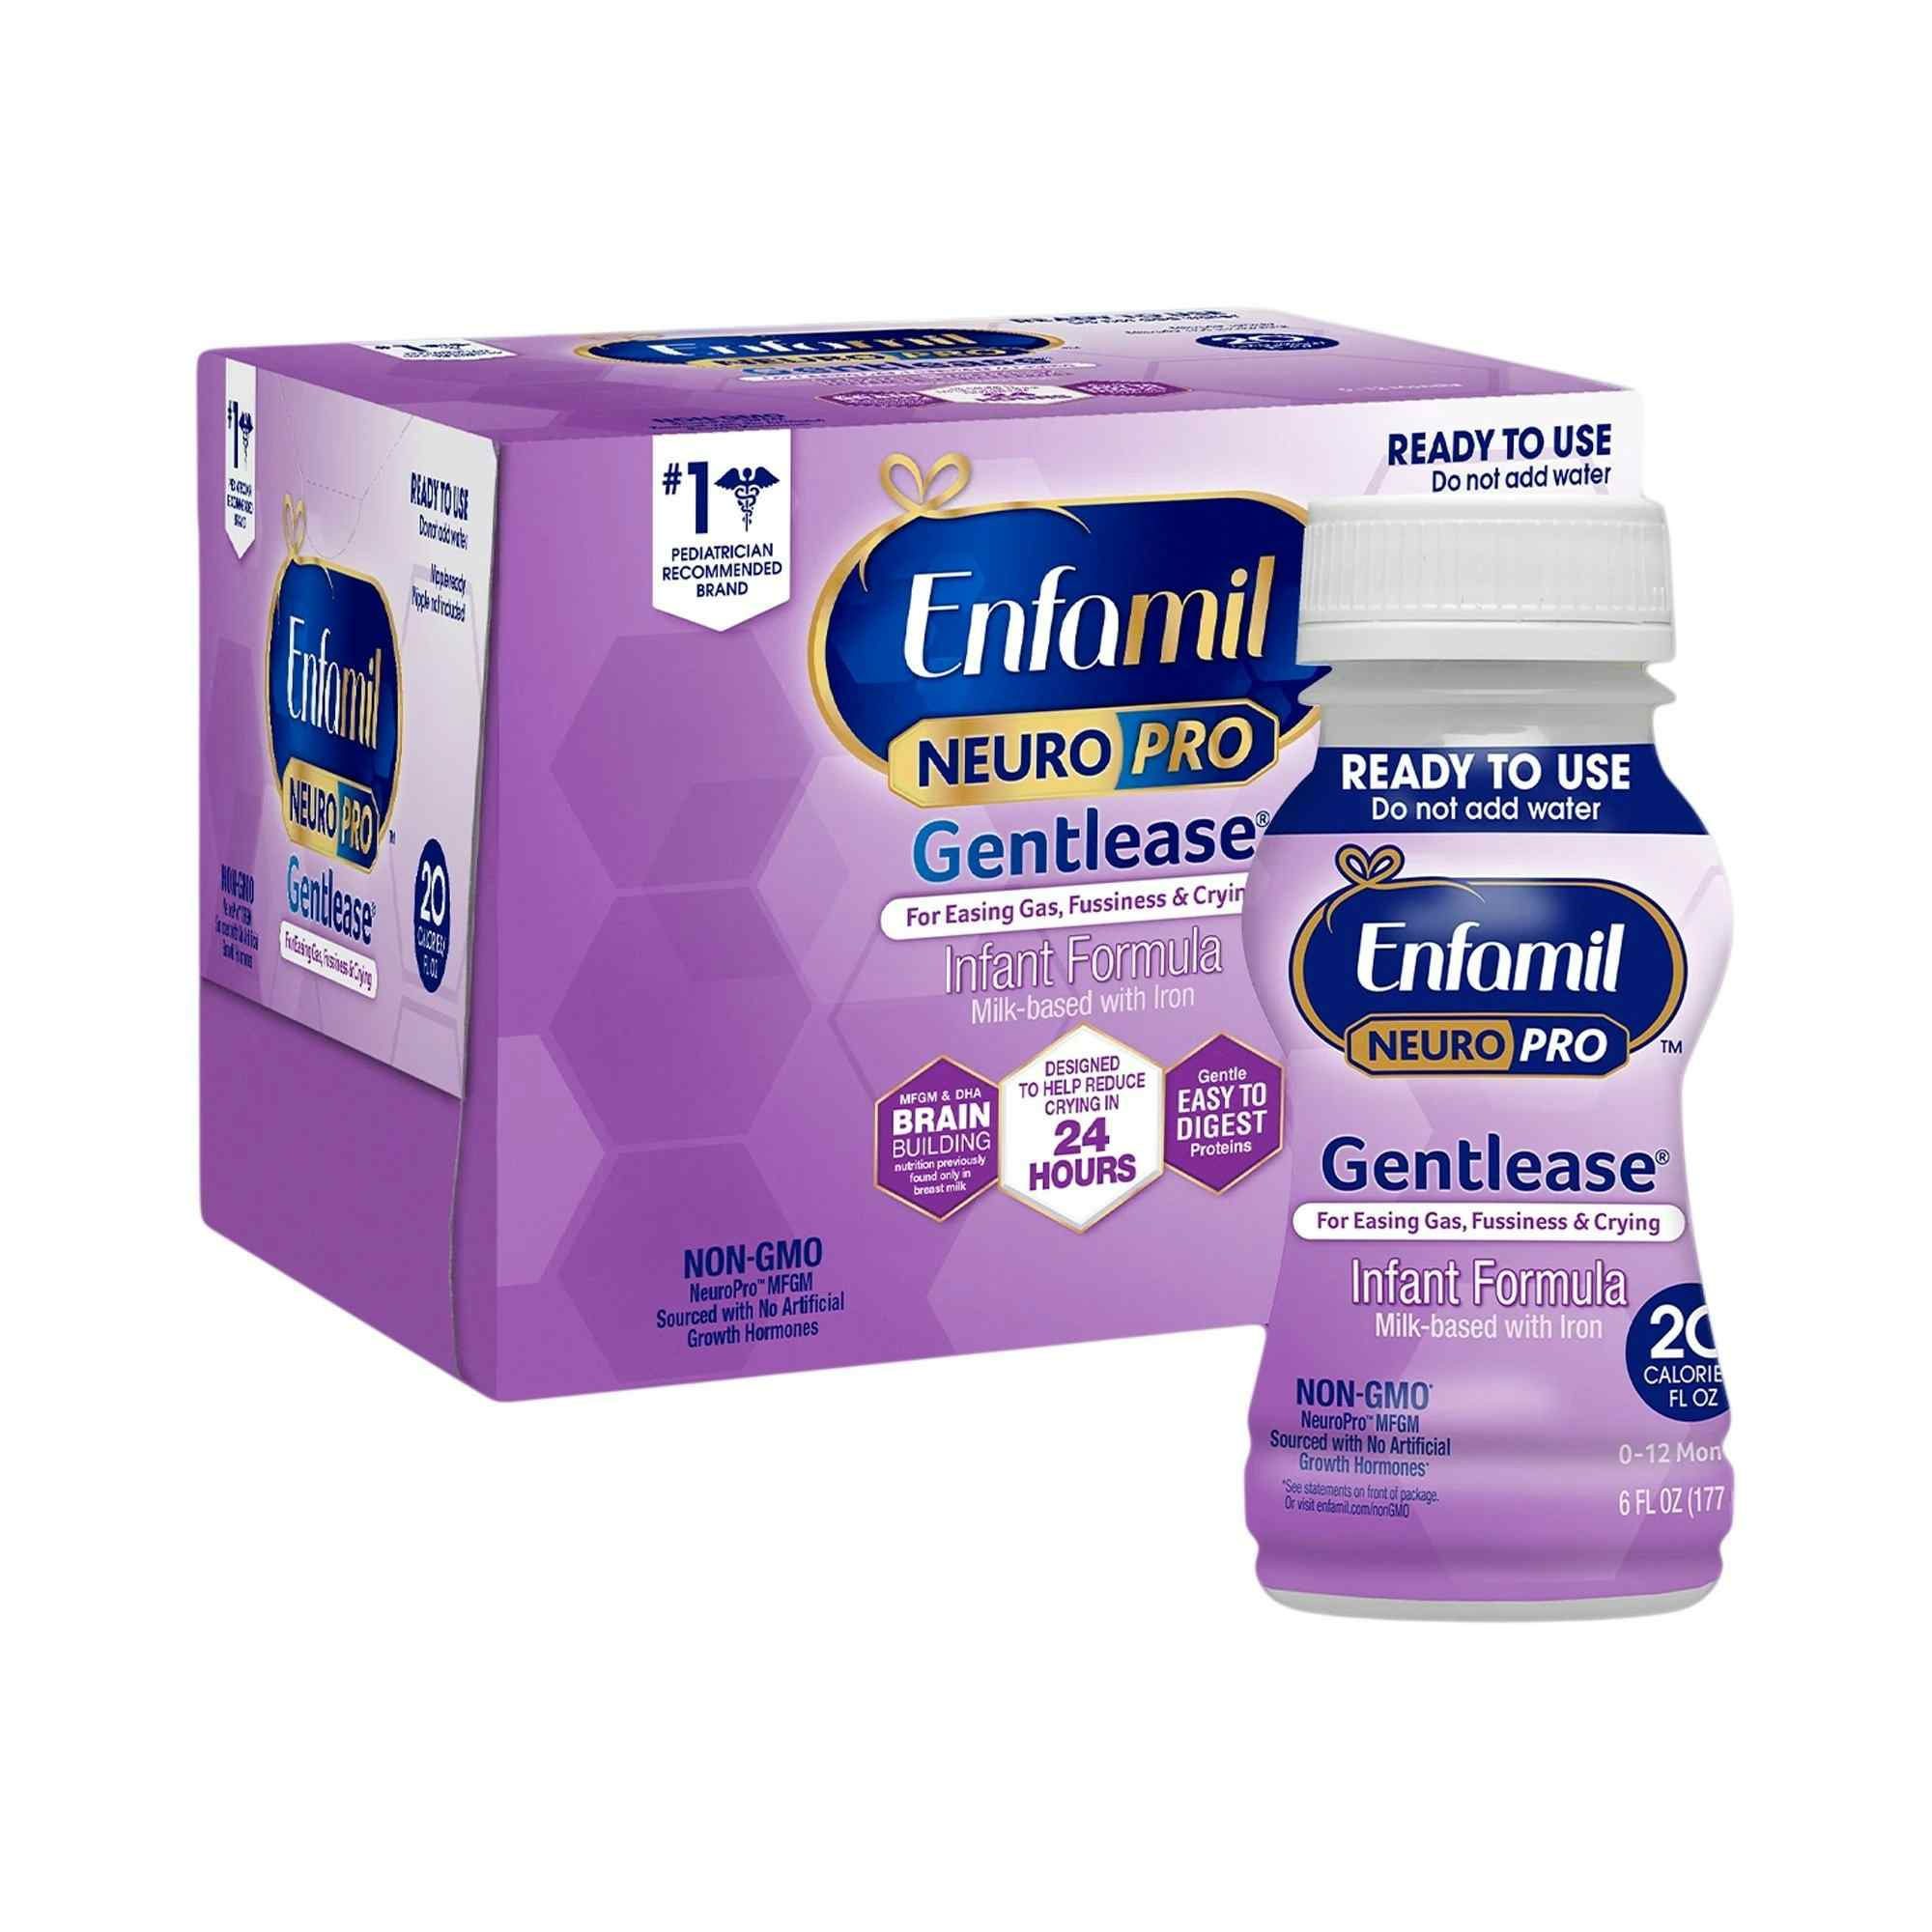 Enfamil NeuroPro Gentlease Ready-to-Use Infant Formula, 6 oz., 898001, Pack of 6